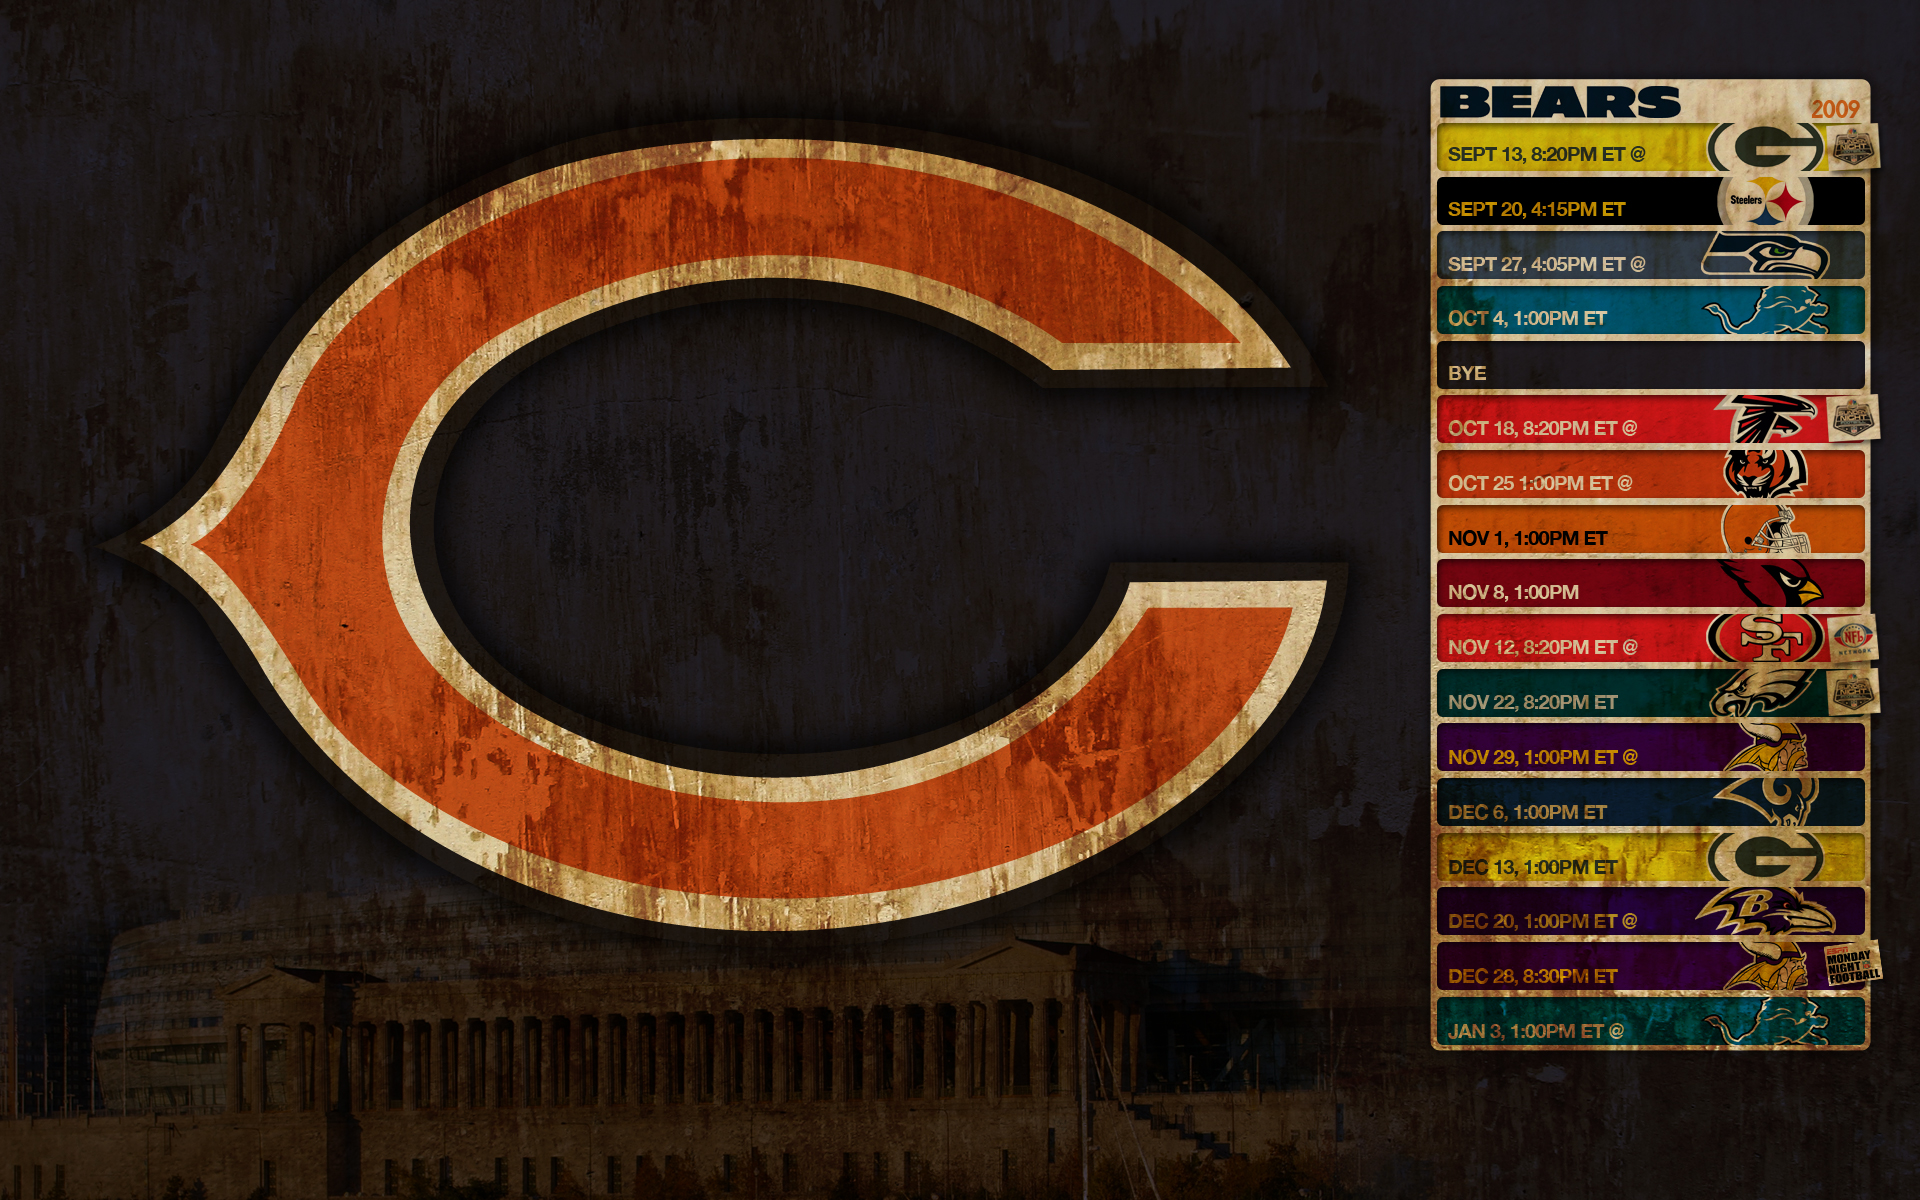 The best Chicago Bears wallpaper ever Chicago Bears wallpapers